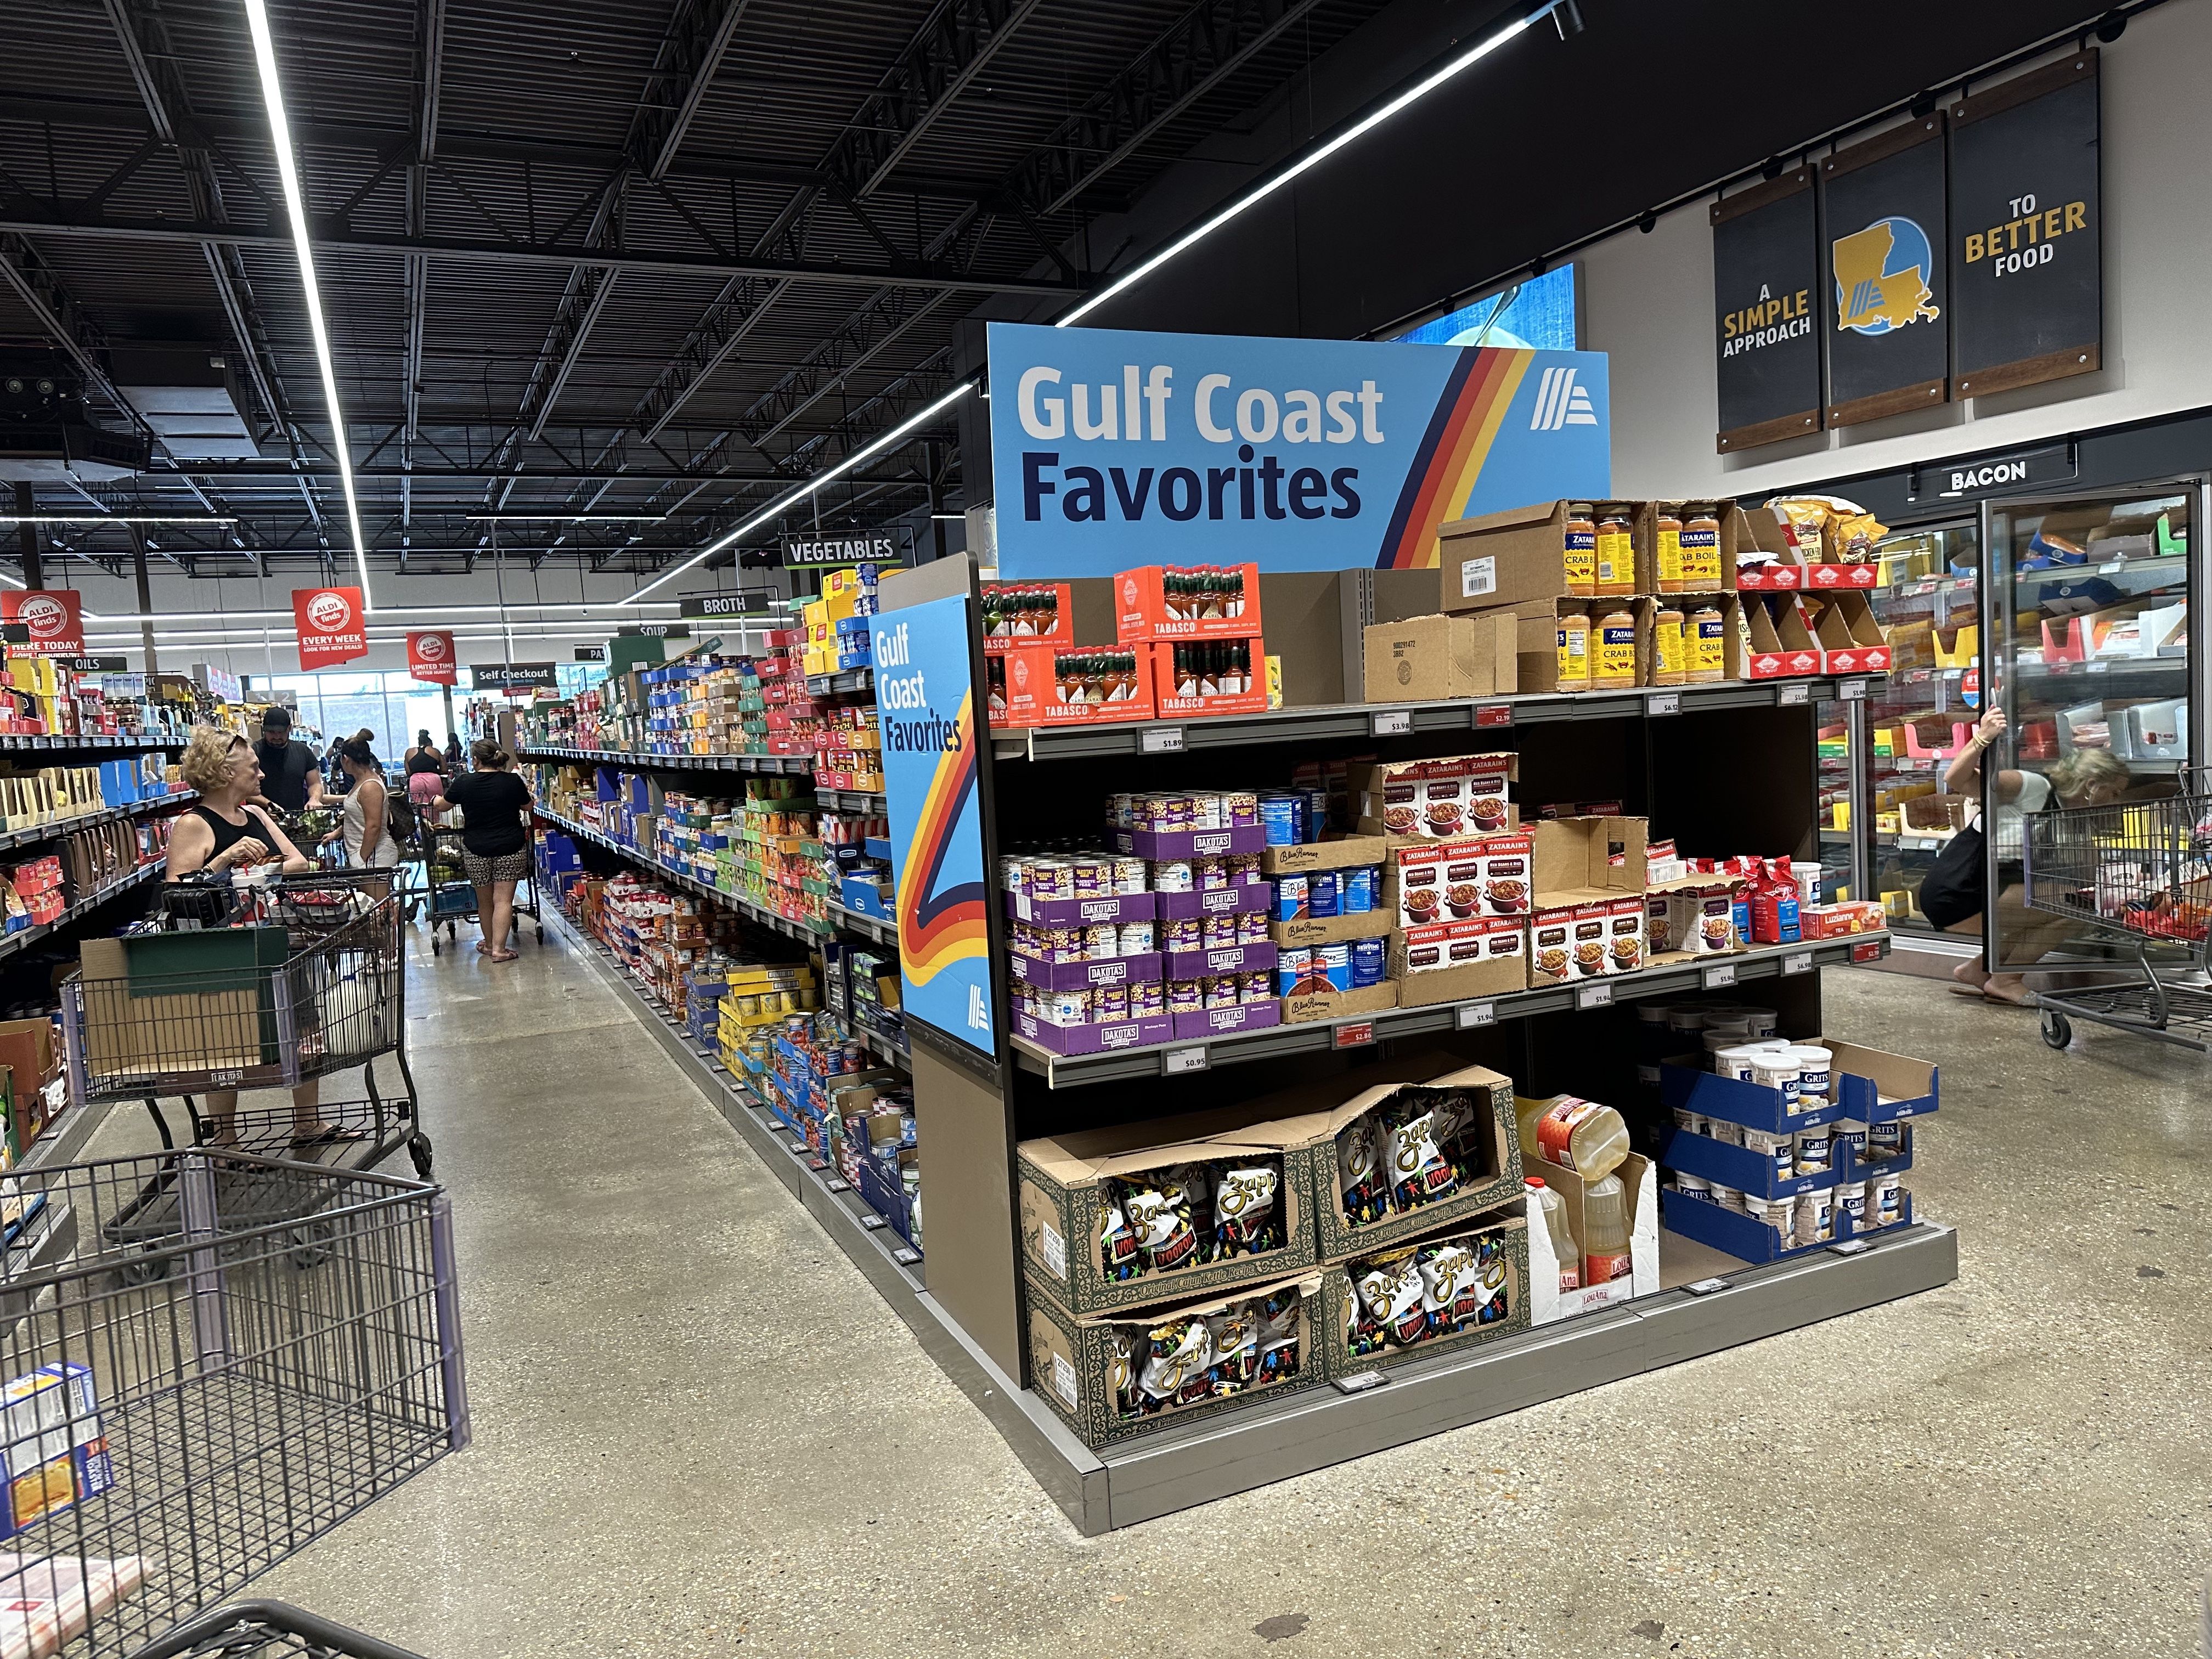 An Aldi aisle end cap is filled with locally-produced items, like Zatarain's boxes, Blue Runner red beans and Tabasco.